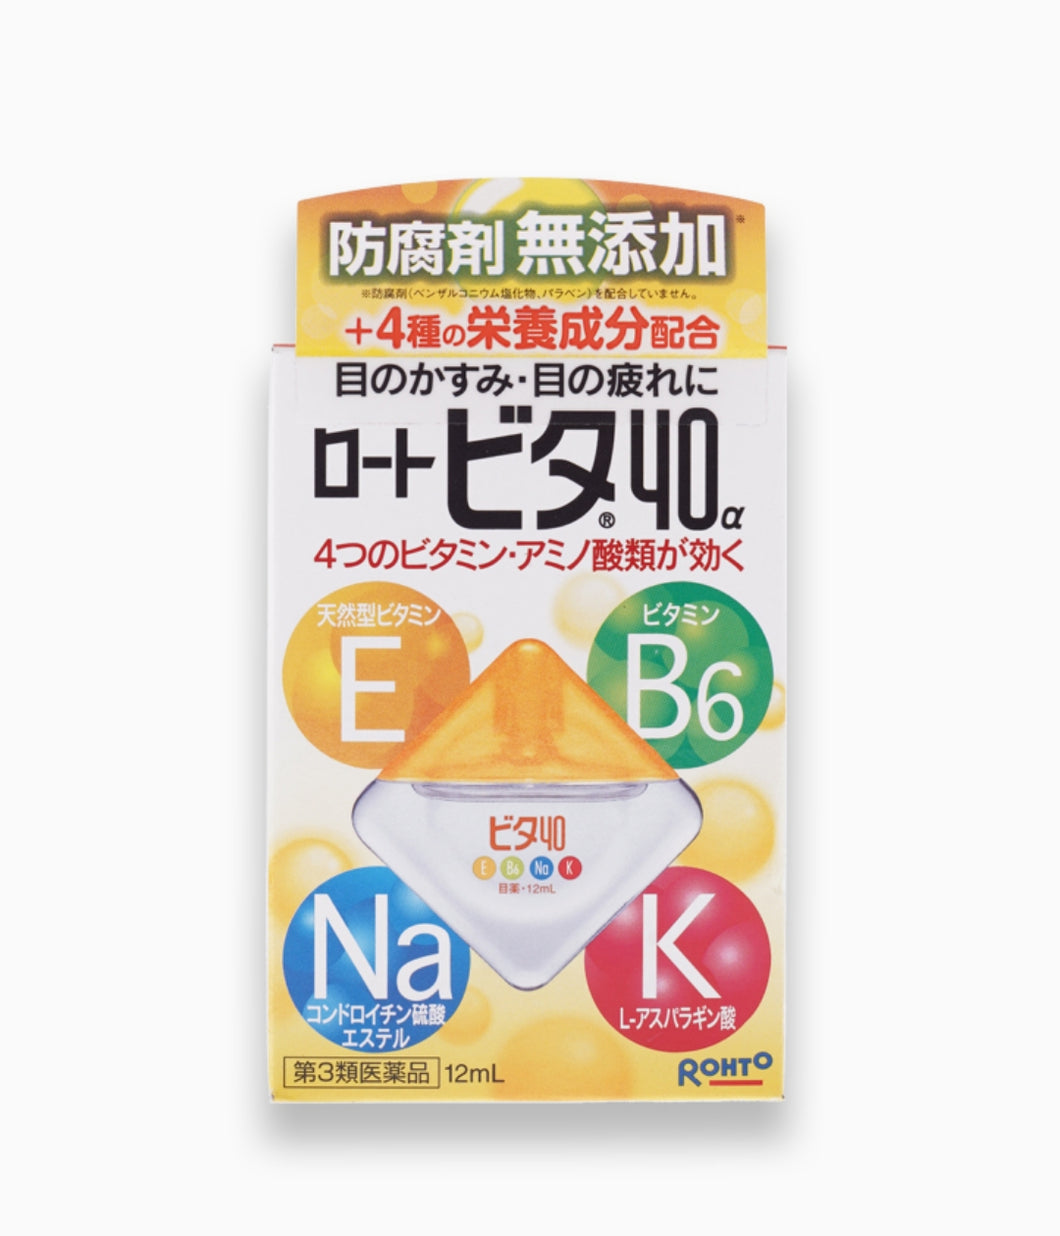 Rohto Cool 40a Alpha Vitamin - Good for Tired Eyes (Mild Cool)